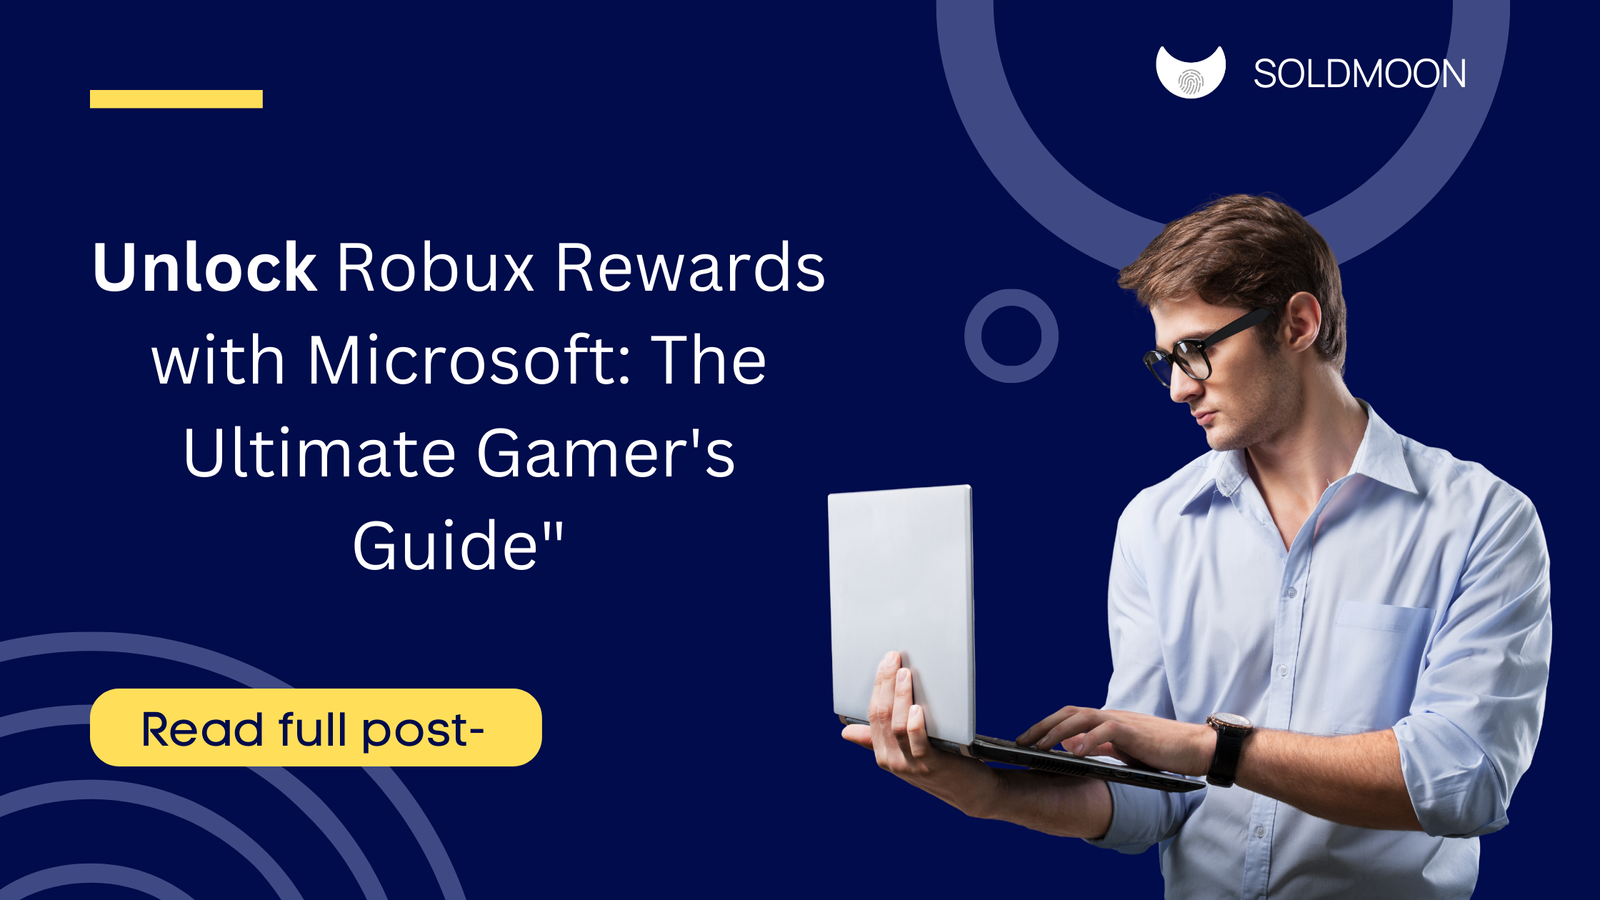 Unlock Robux Rewards with Microsoft: The Ultimate Gamer’s Guide